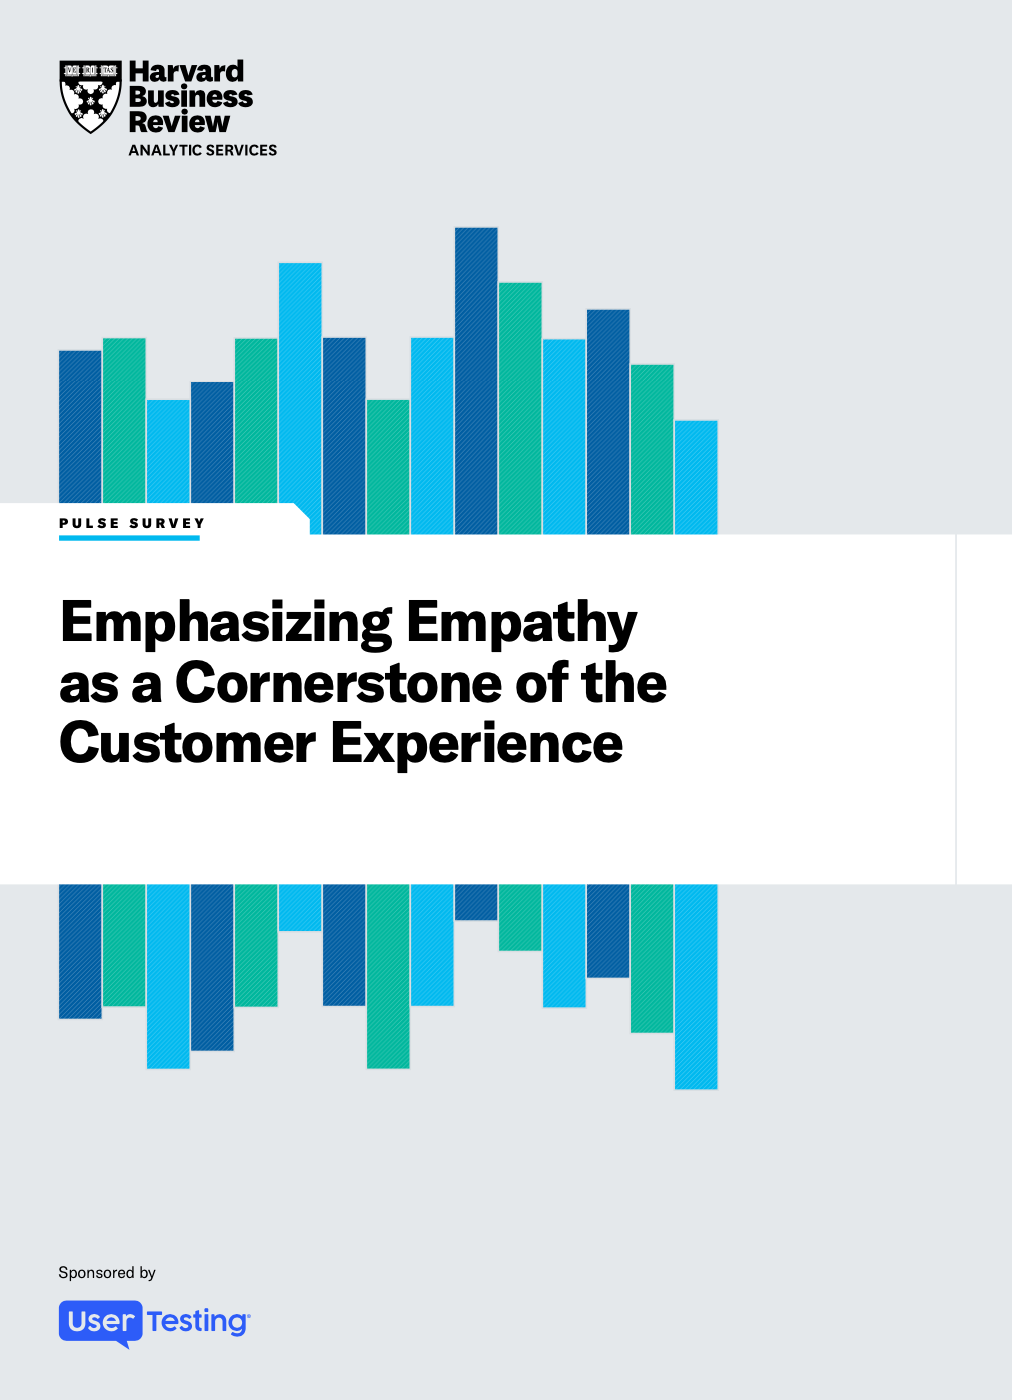 Emphasizing Empathy as a Cornerstone of the Customer Experience